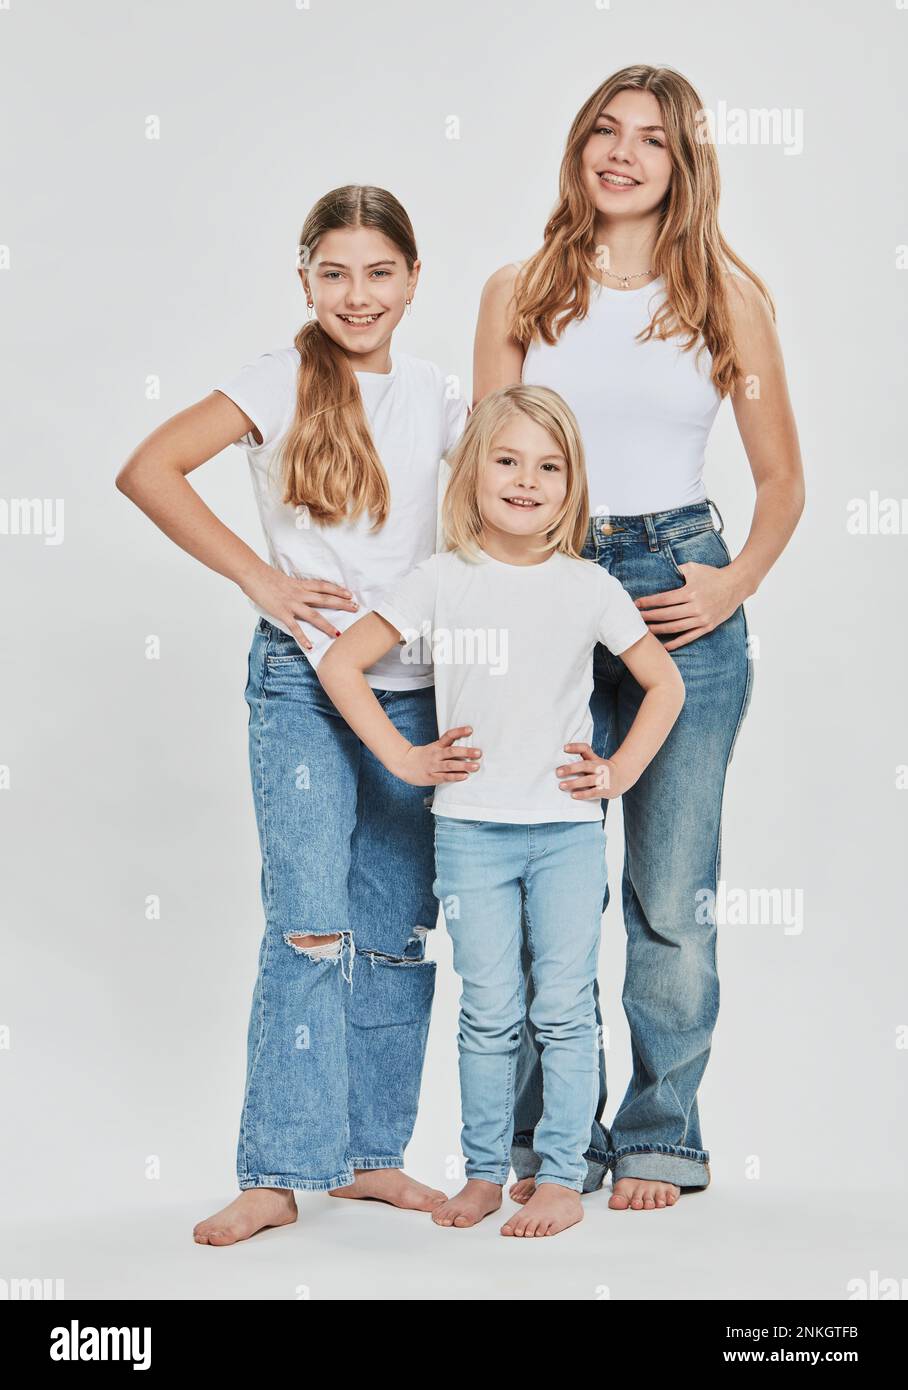 Happy sisters wearing casual clothing against white background Stock Photo